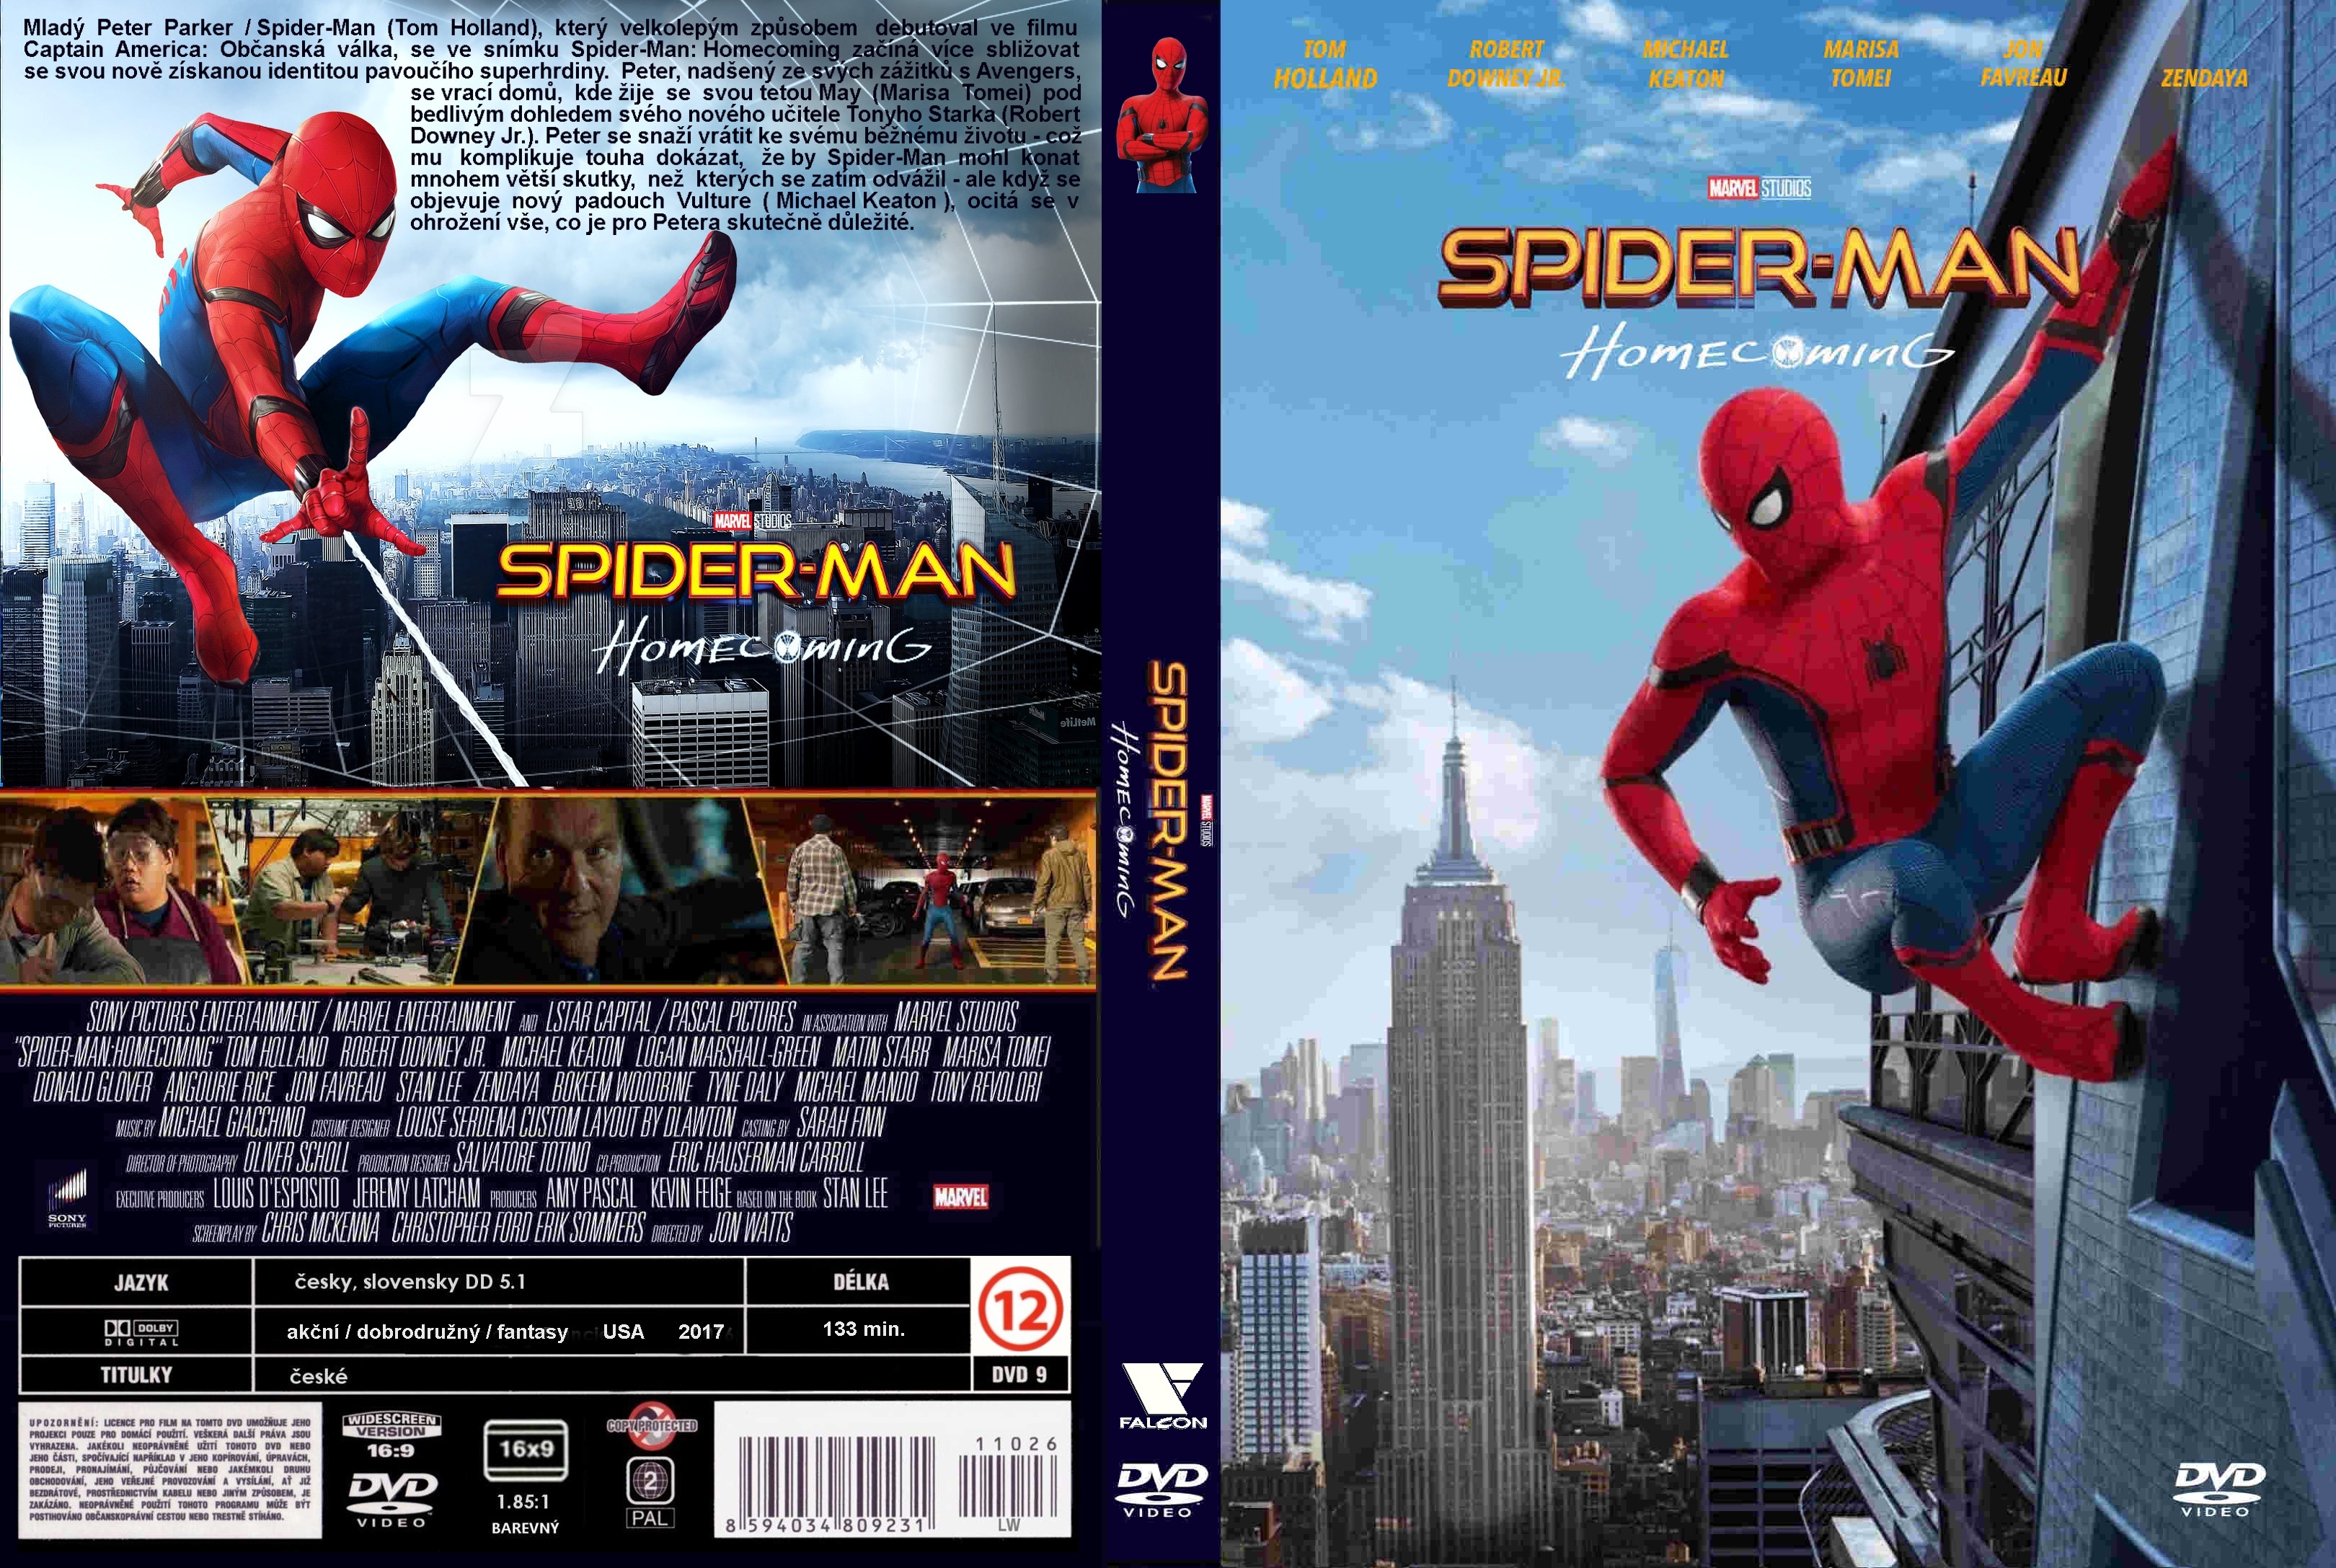 Covers Box Sk Spider Man Homecoming High Quality Dvd